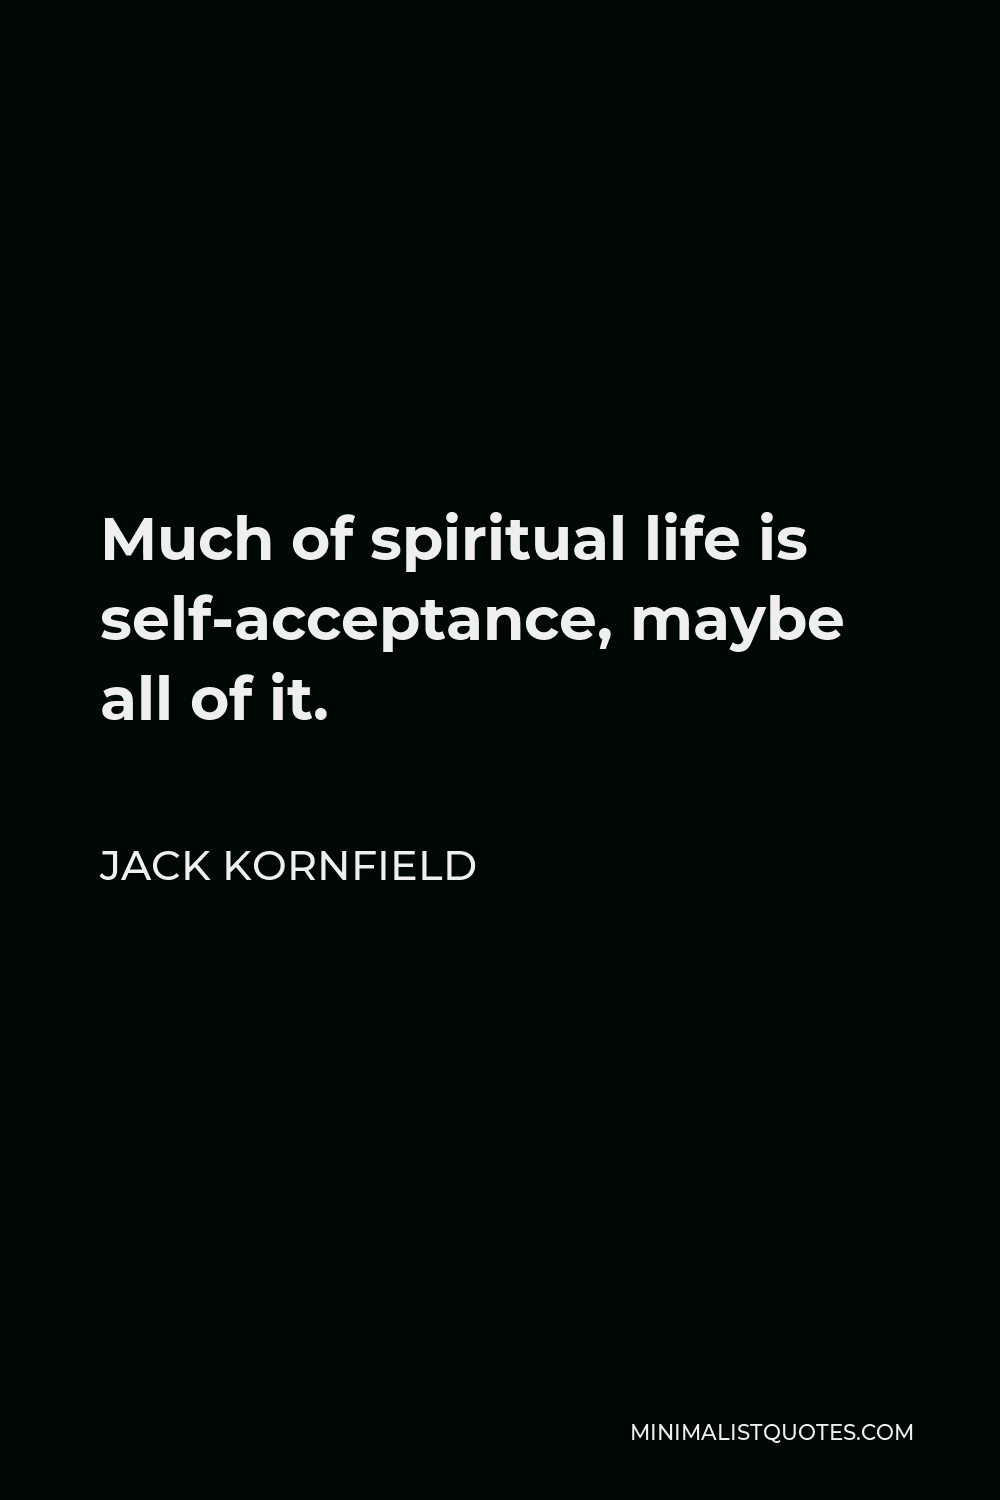 Jack Kornfield Quote - Much of spiritual life is self-acceptance, maybe all of it.